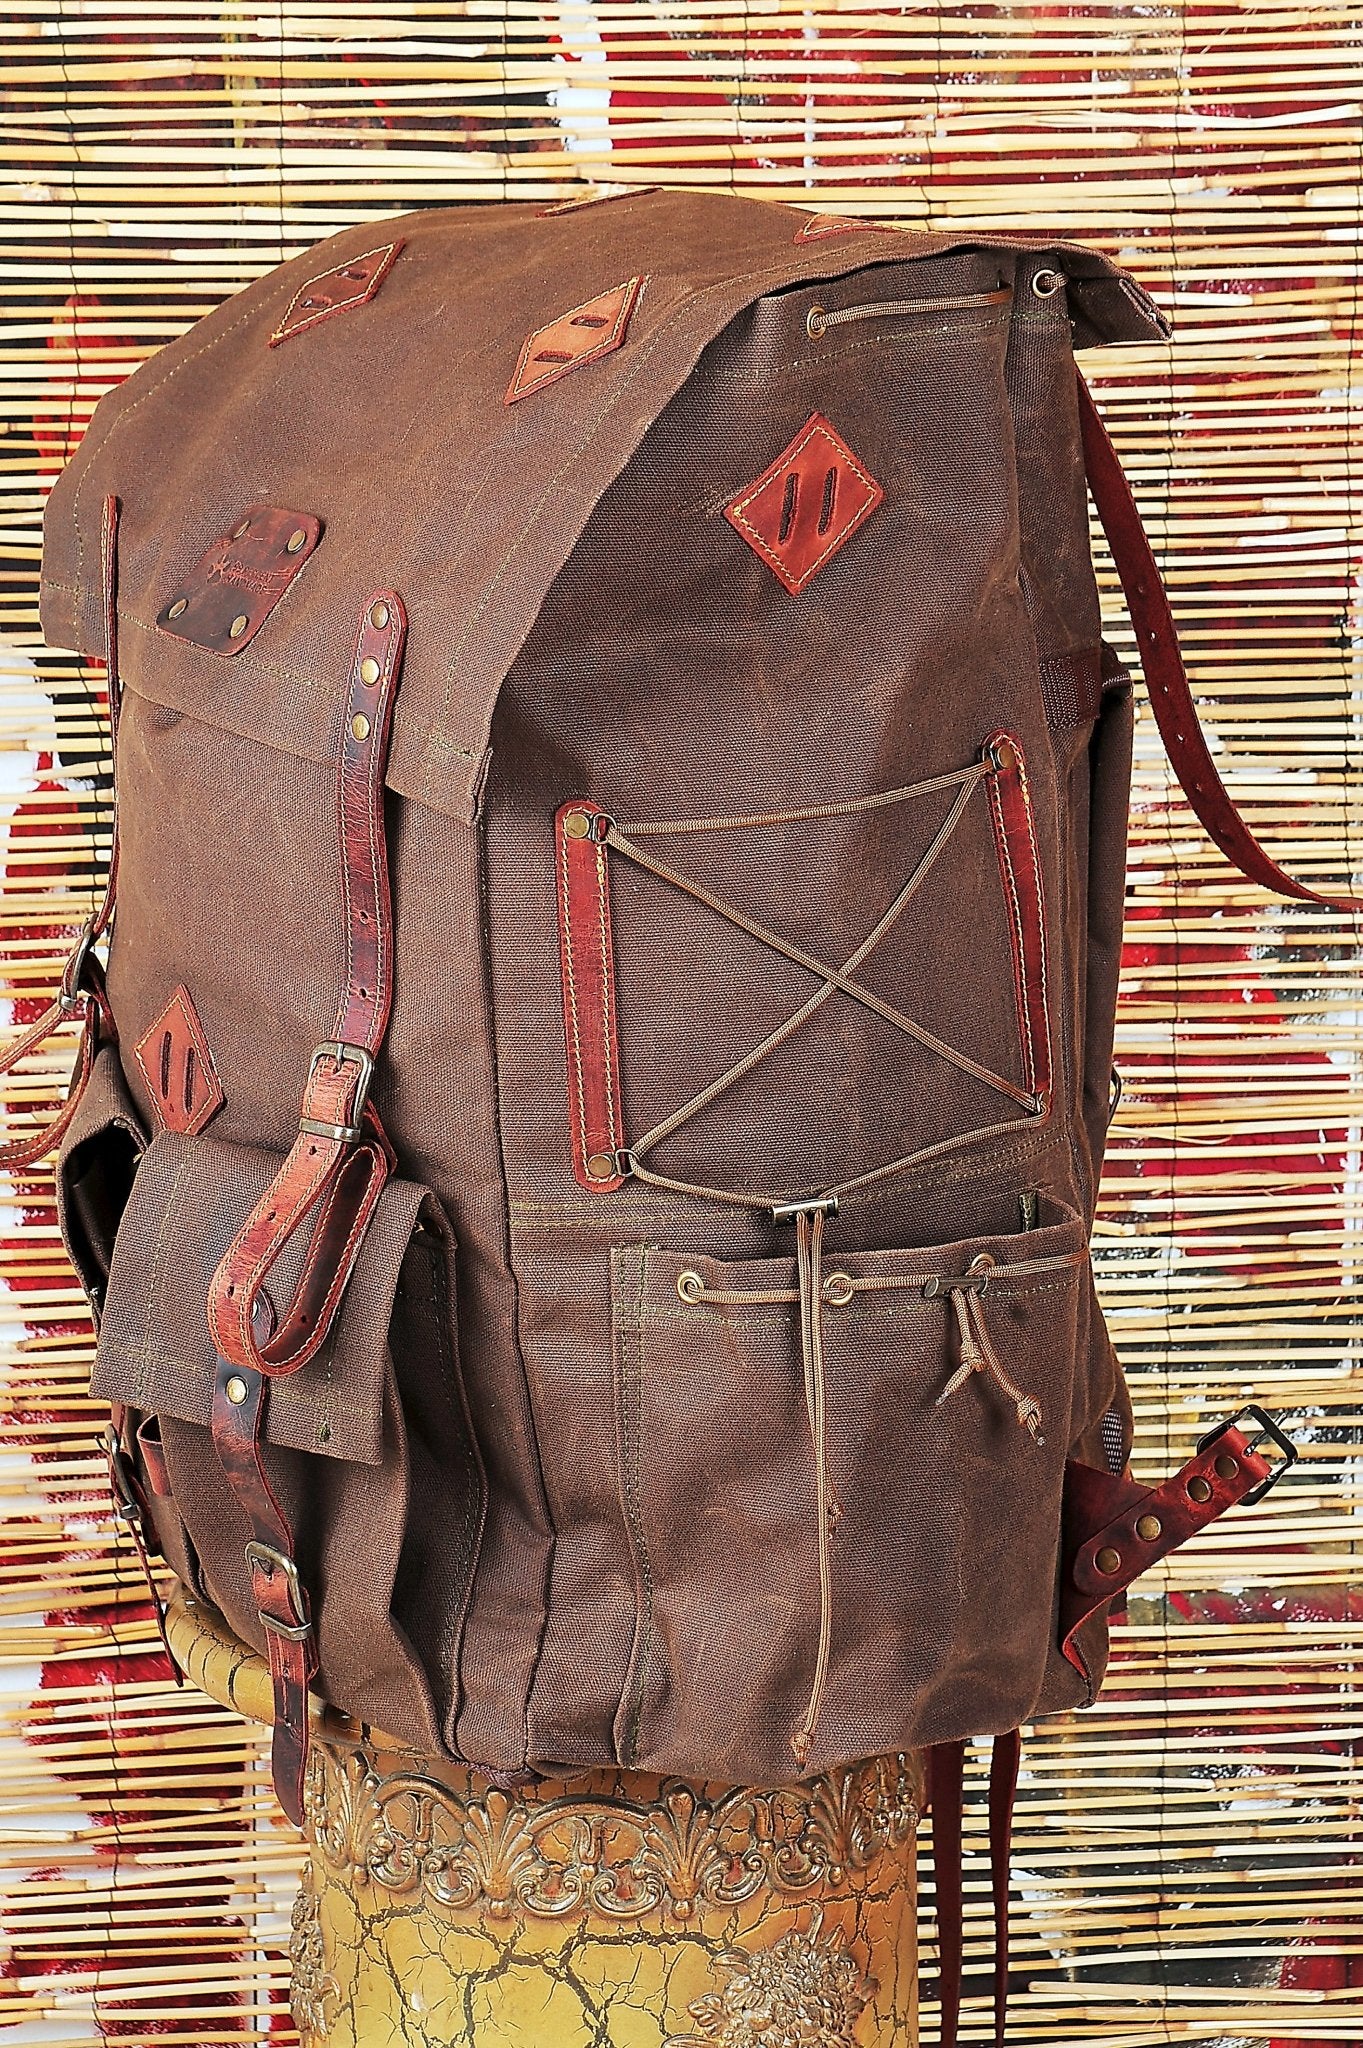 30L to 50L | Bushcraft Backpack | Brown, Green, Dhaki Colours | Handmade Leather, Waxed Canvas Backpack for Travel-Camping | Personalization bushcraft - camping - hiking backpack 99percenthandmade   